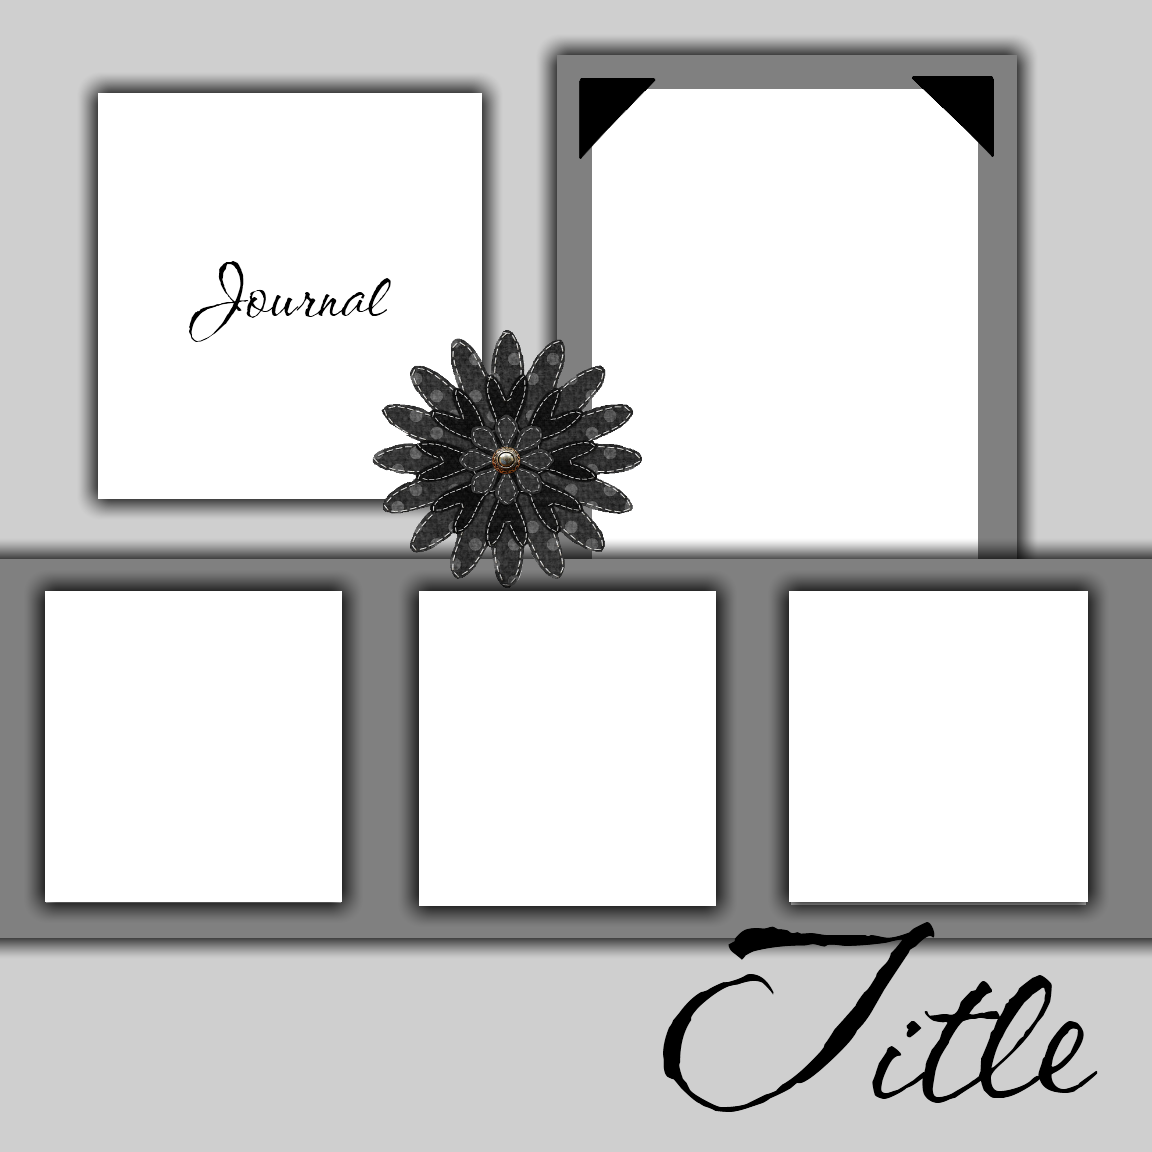 wedding-printable-images-gallery-category-page-3-printablee